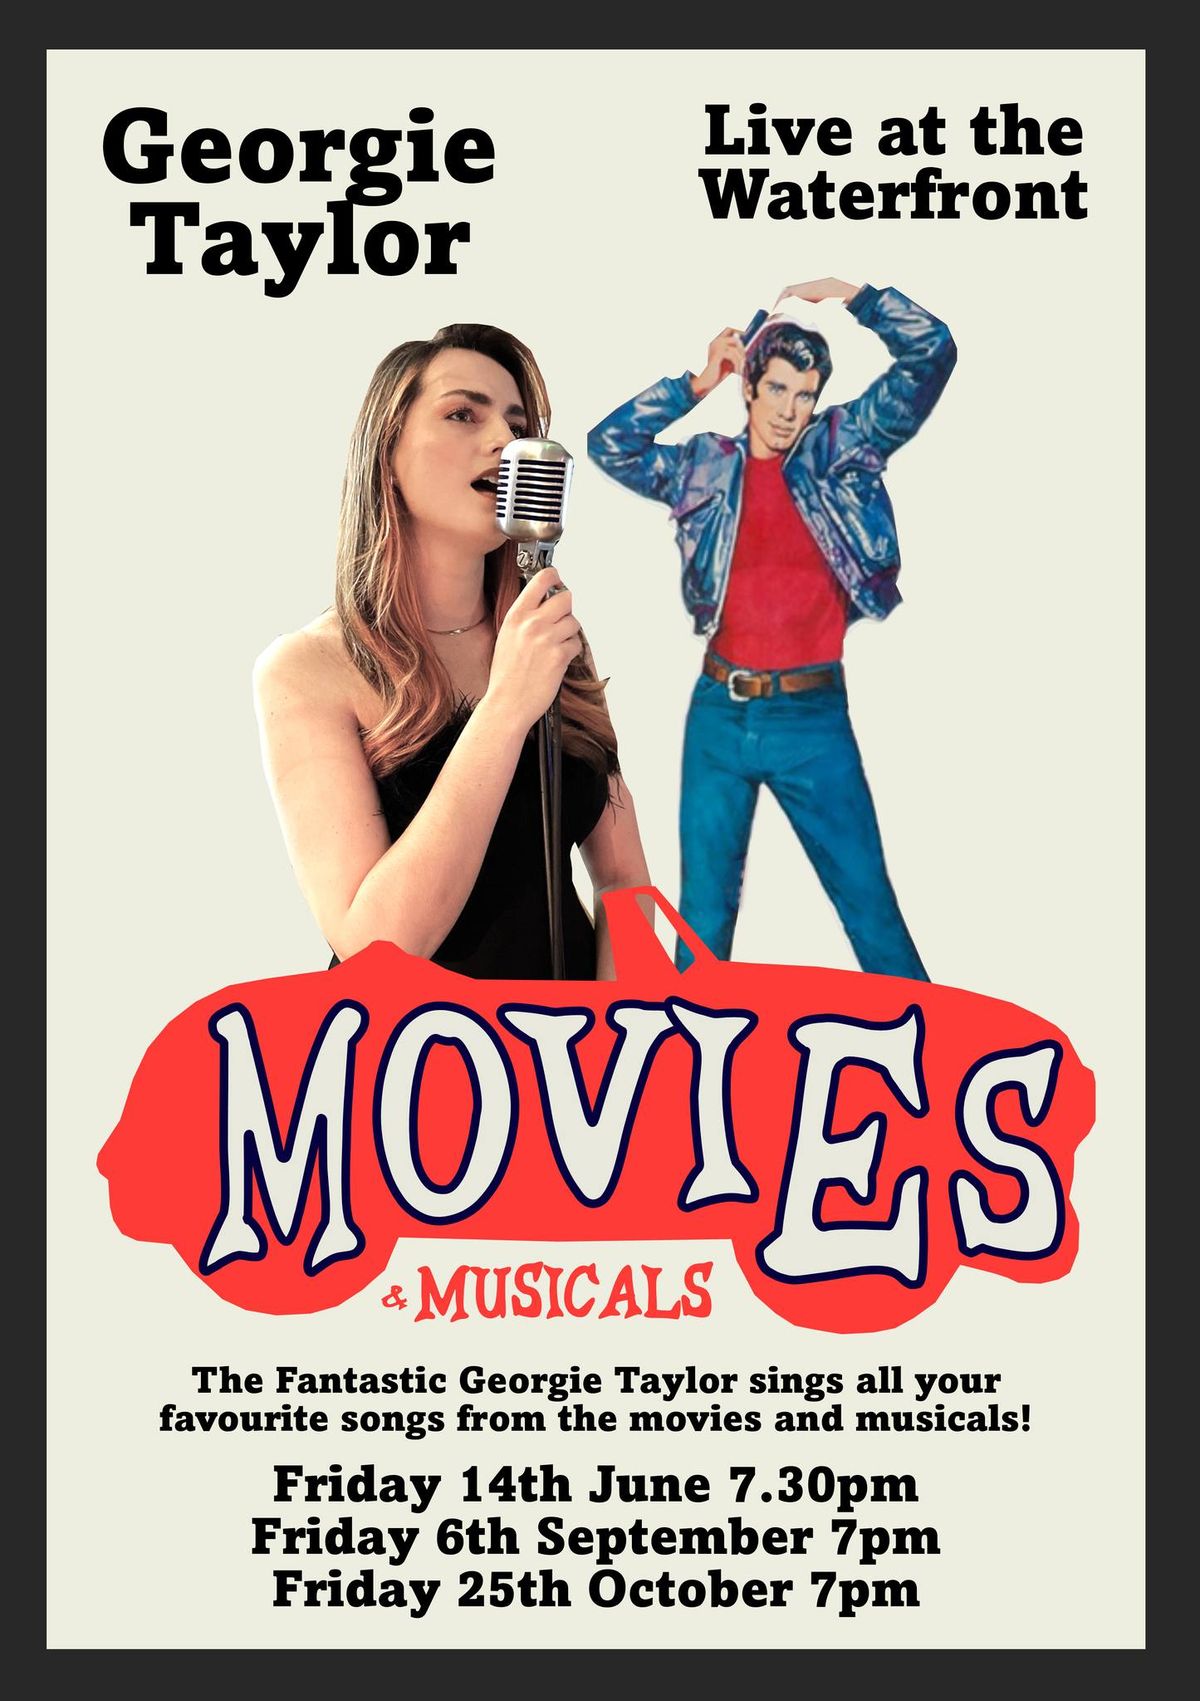 Live Music from the Movies and Musicals by Georgie Taylor!